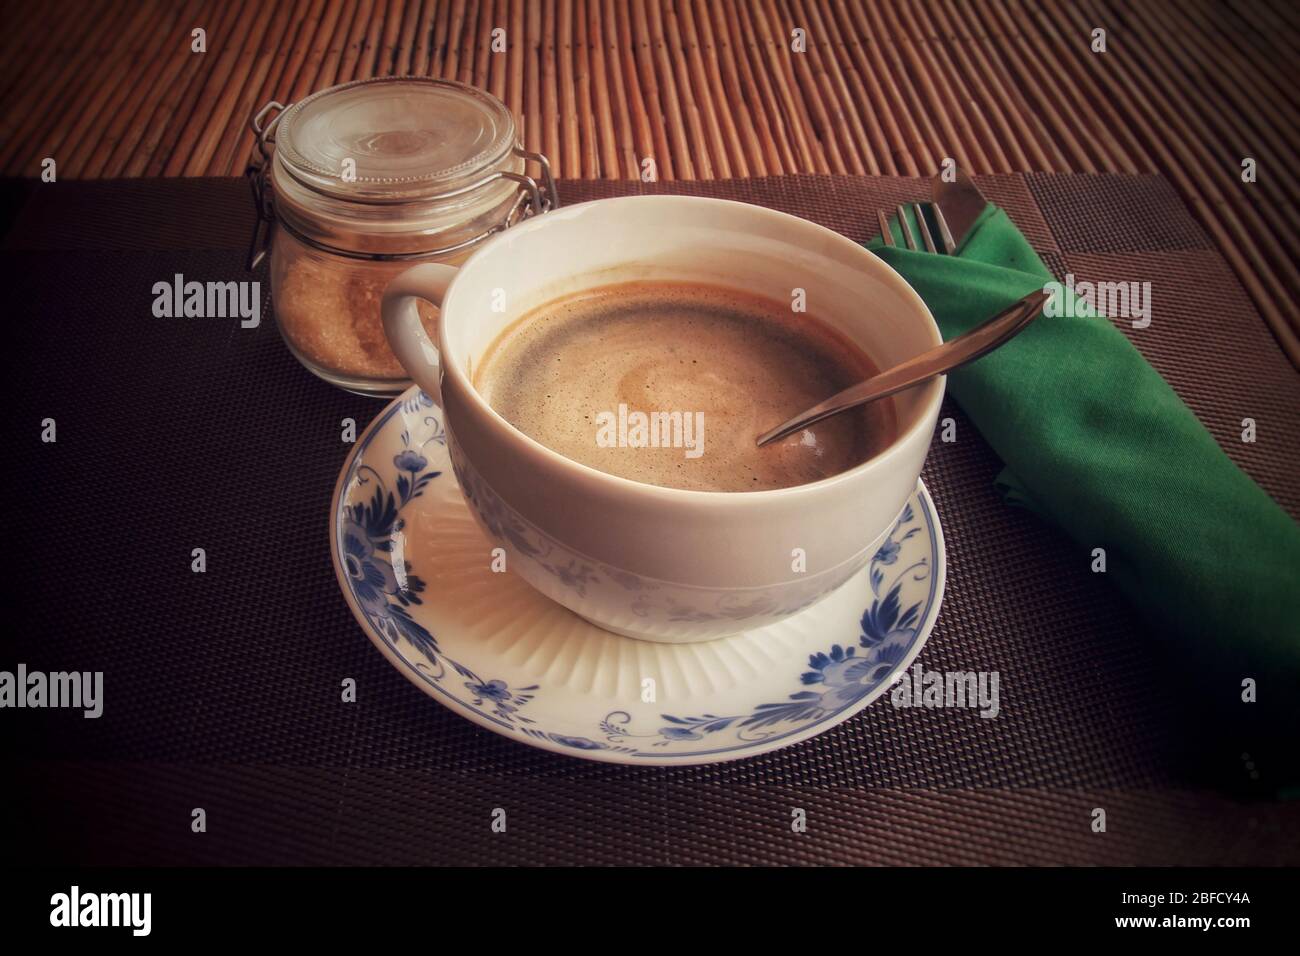 Conceptual photo of a single cup of coffee against a wooden table to show concept of self isolation and social distancing as the new normal Stock Photo